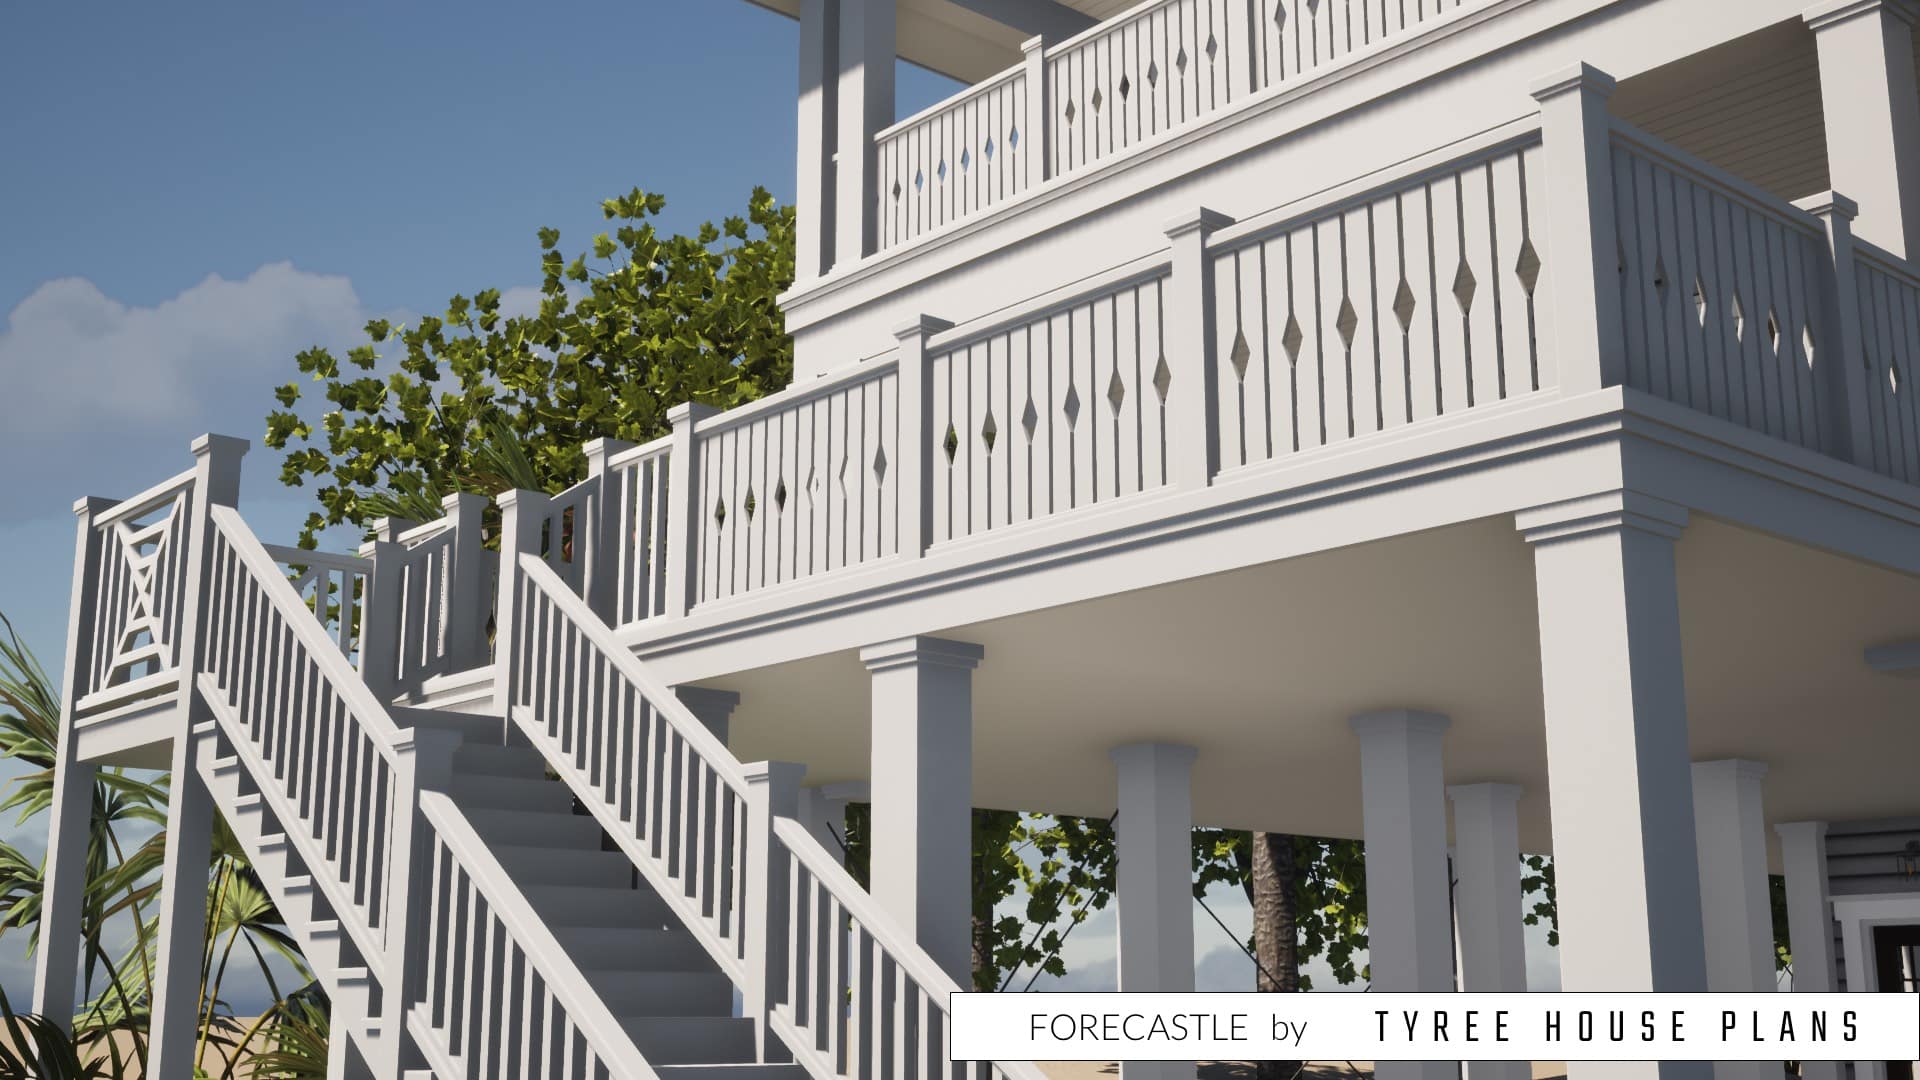 Stairs up to the rear porch and sundeck. Forecastle by Tyree House Plans.